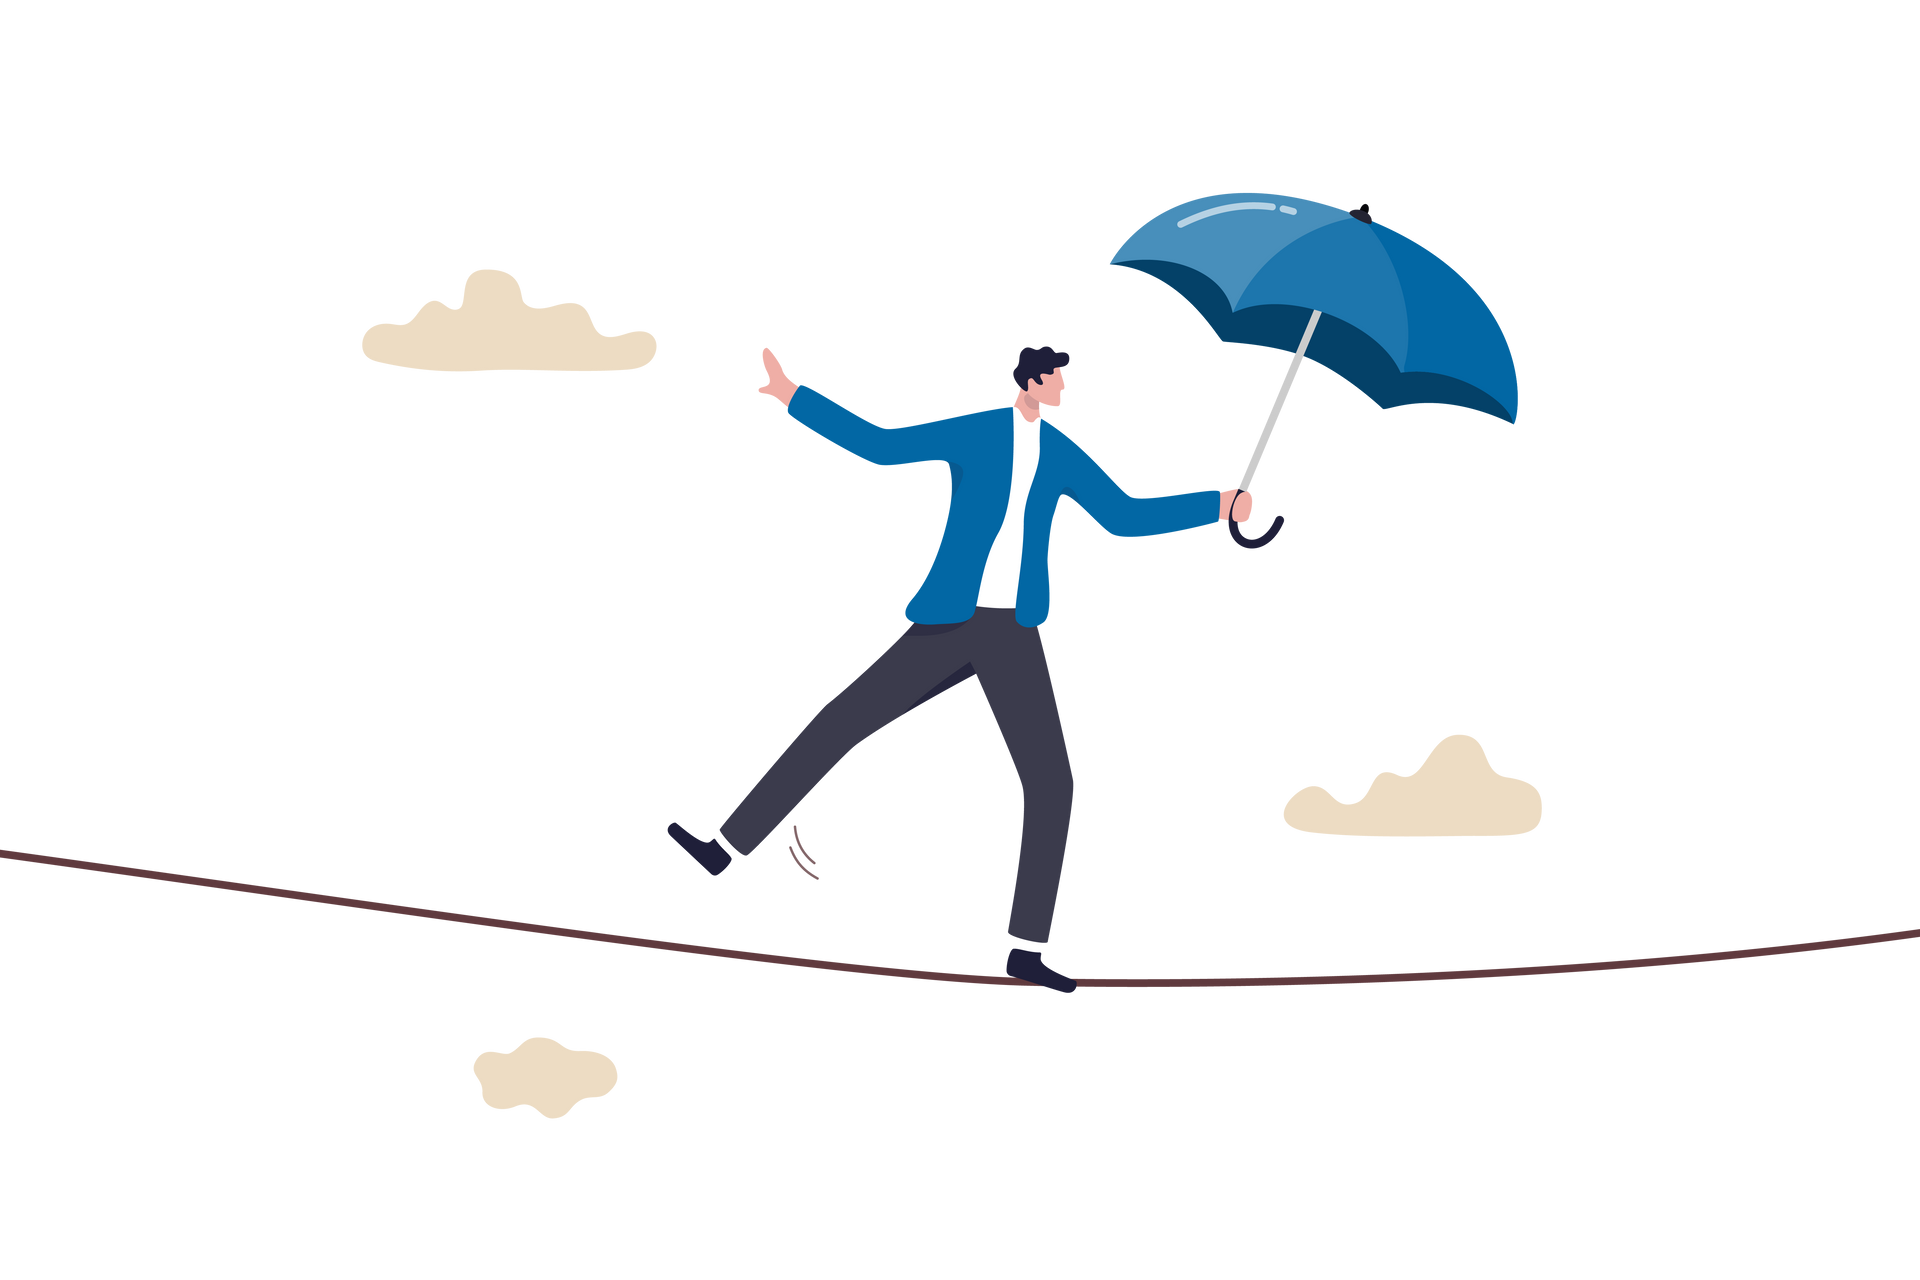 A man is walking on a tightrope with an umbrella.